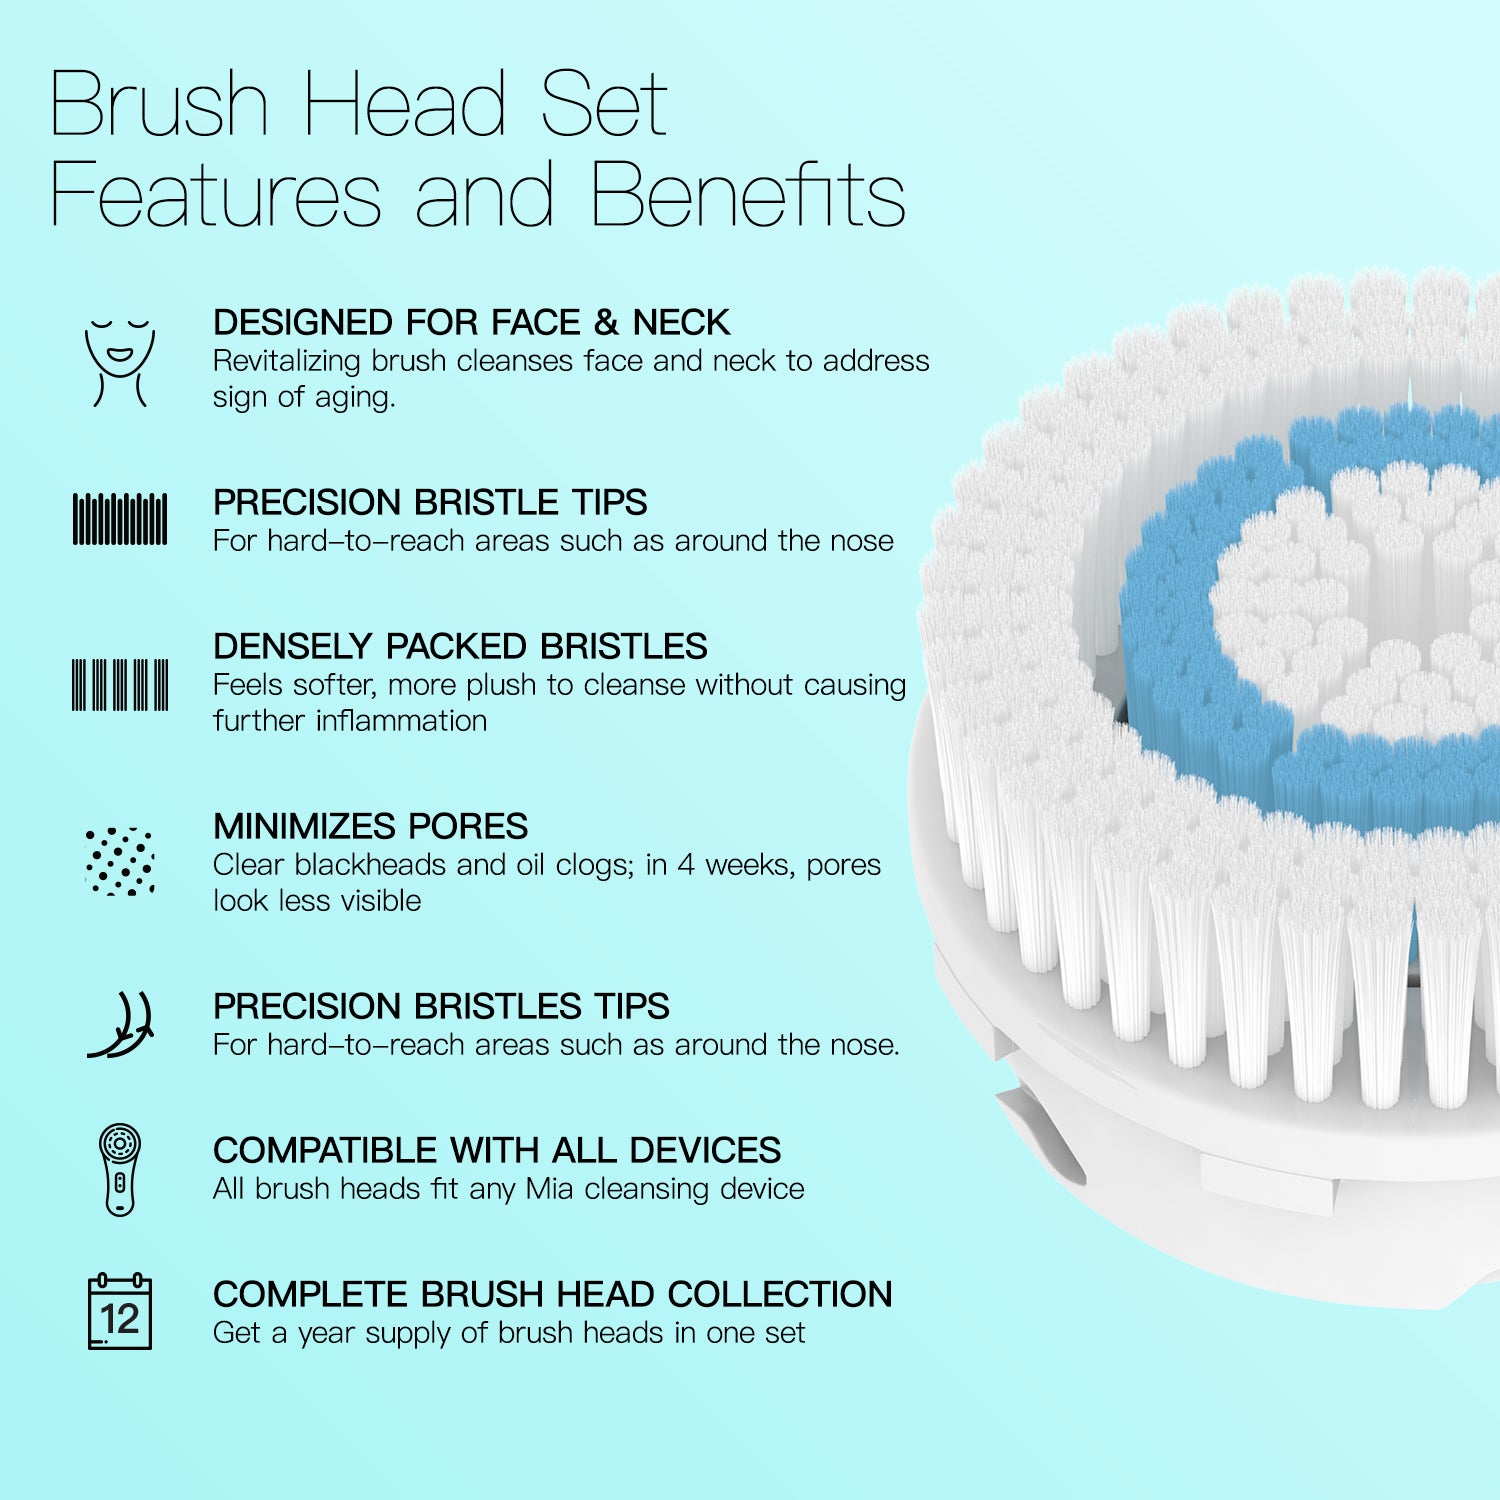 Replacement Facial Cleansing Brush Heads for Clarisonic, Revitalizing Cleanse, 4-pack